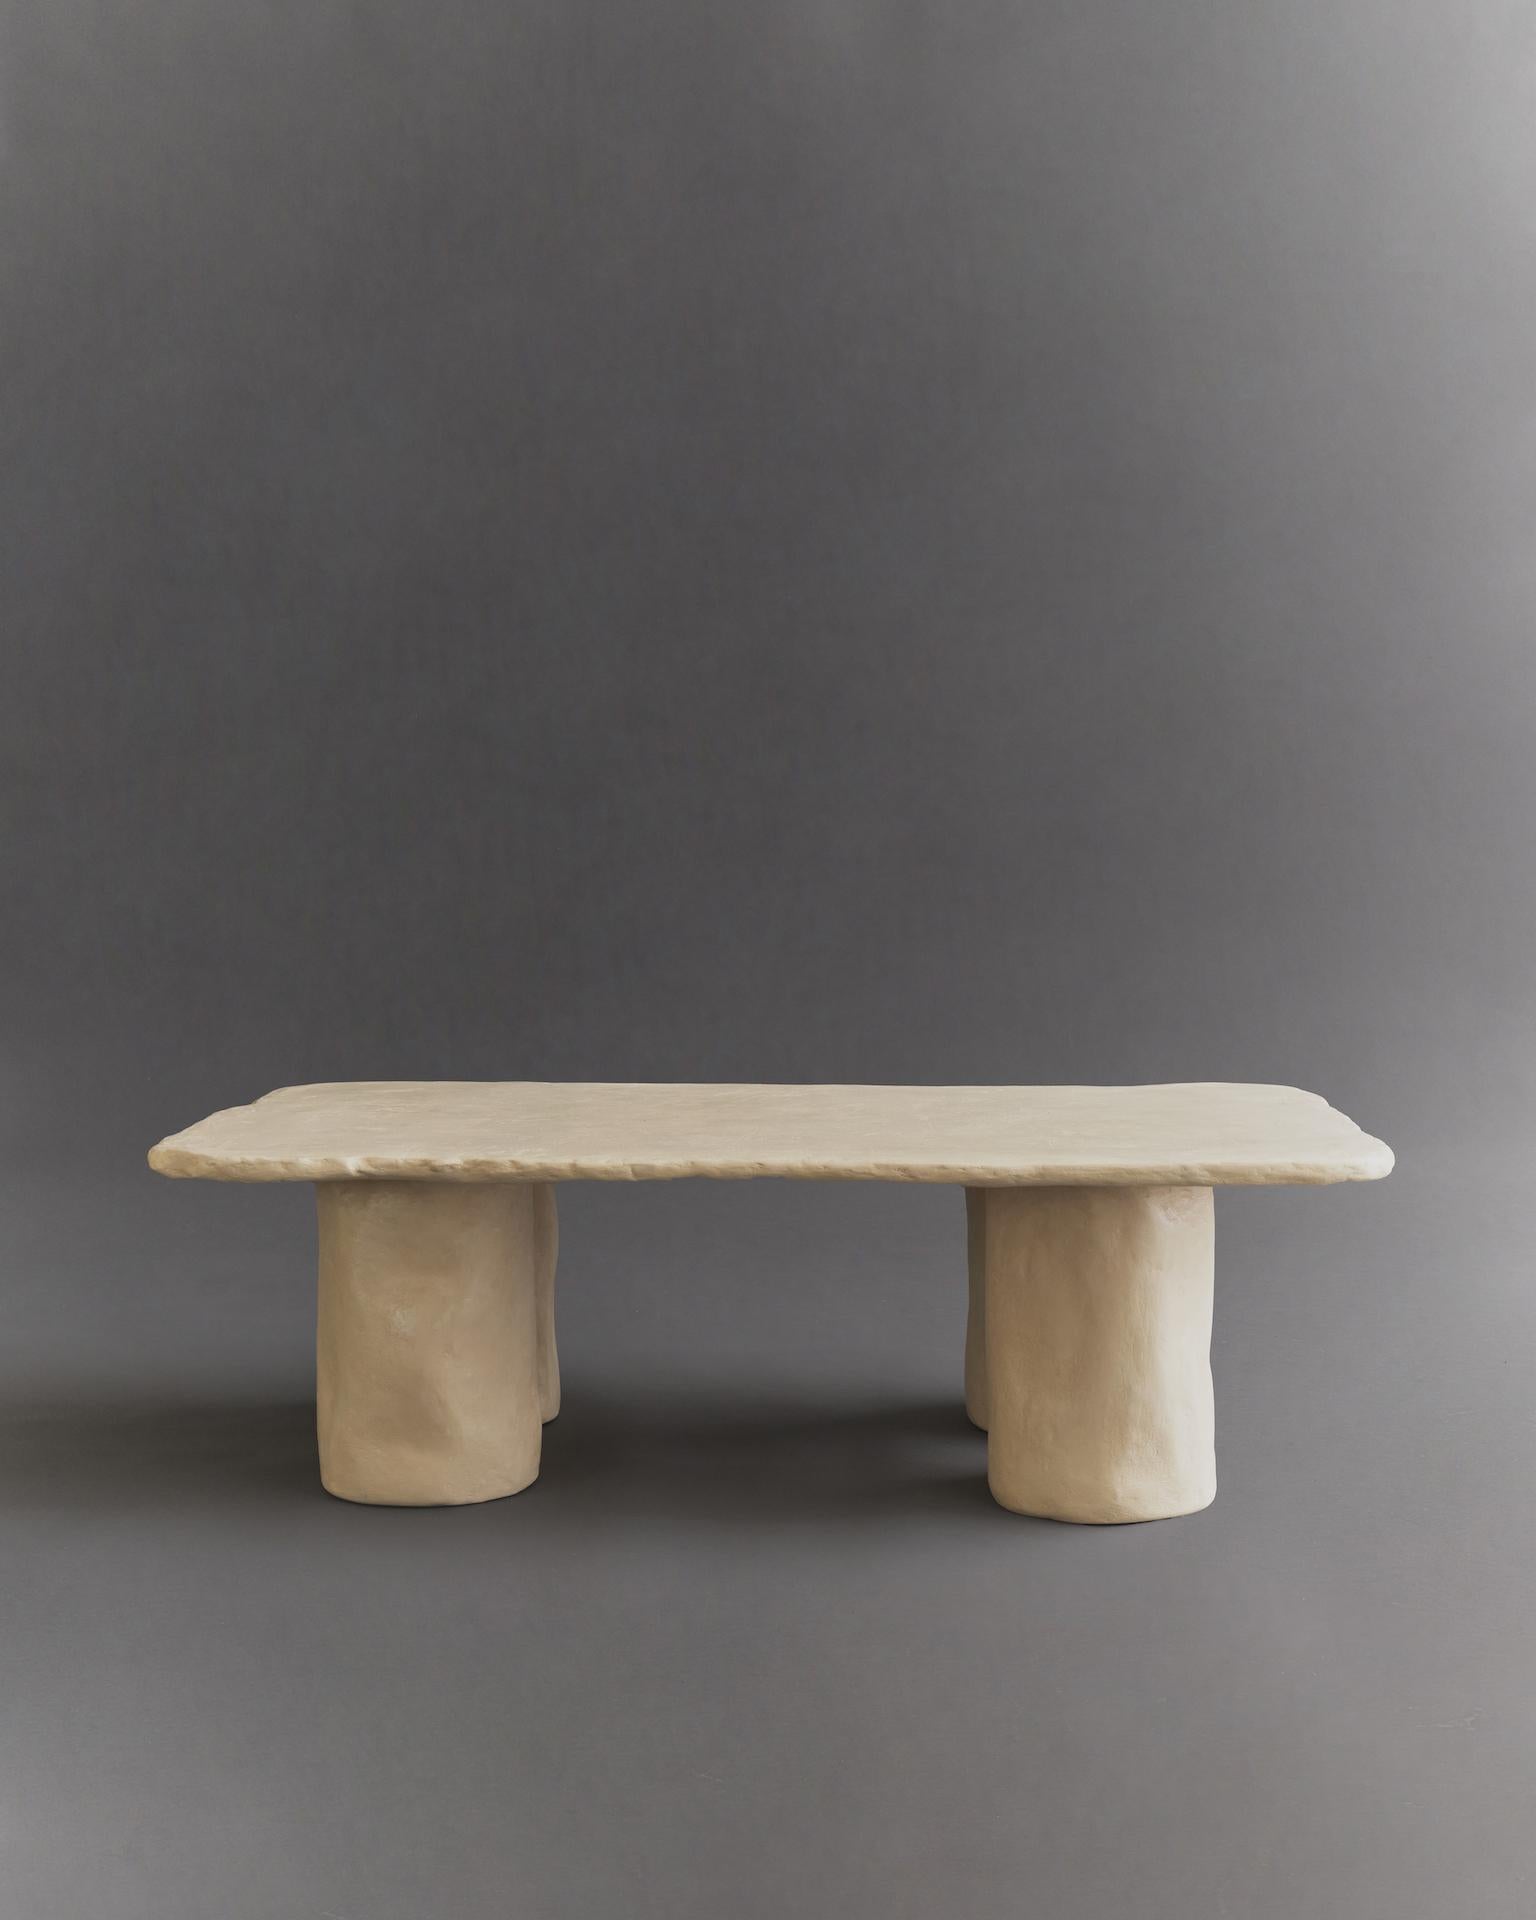 Ōmbia Studio is a ceramic sculpture and design studio based in Los Angeles. The name and its roots originates from Colombia, where designer and founder Cristina Moreno comes from.

Inspired by stone slabs, this table embodies texture, organic